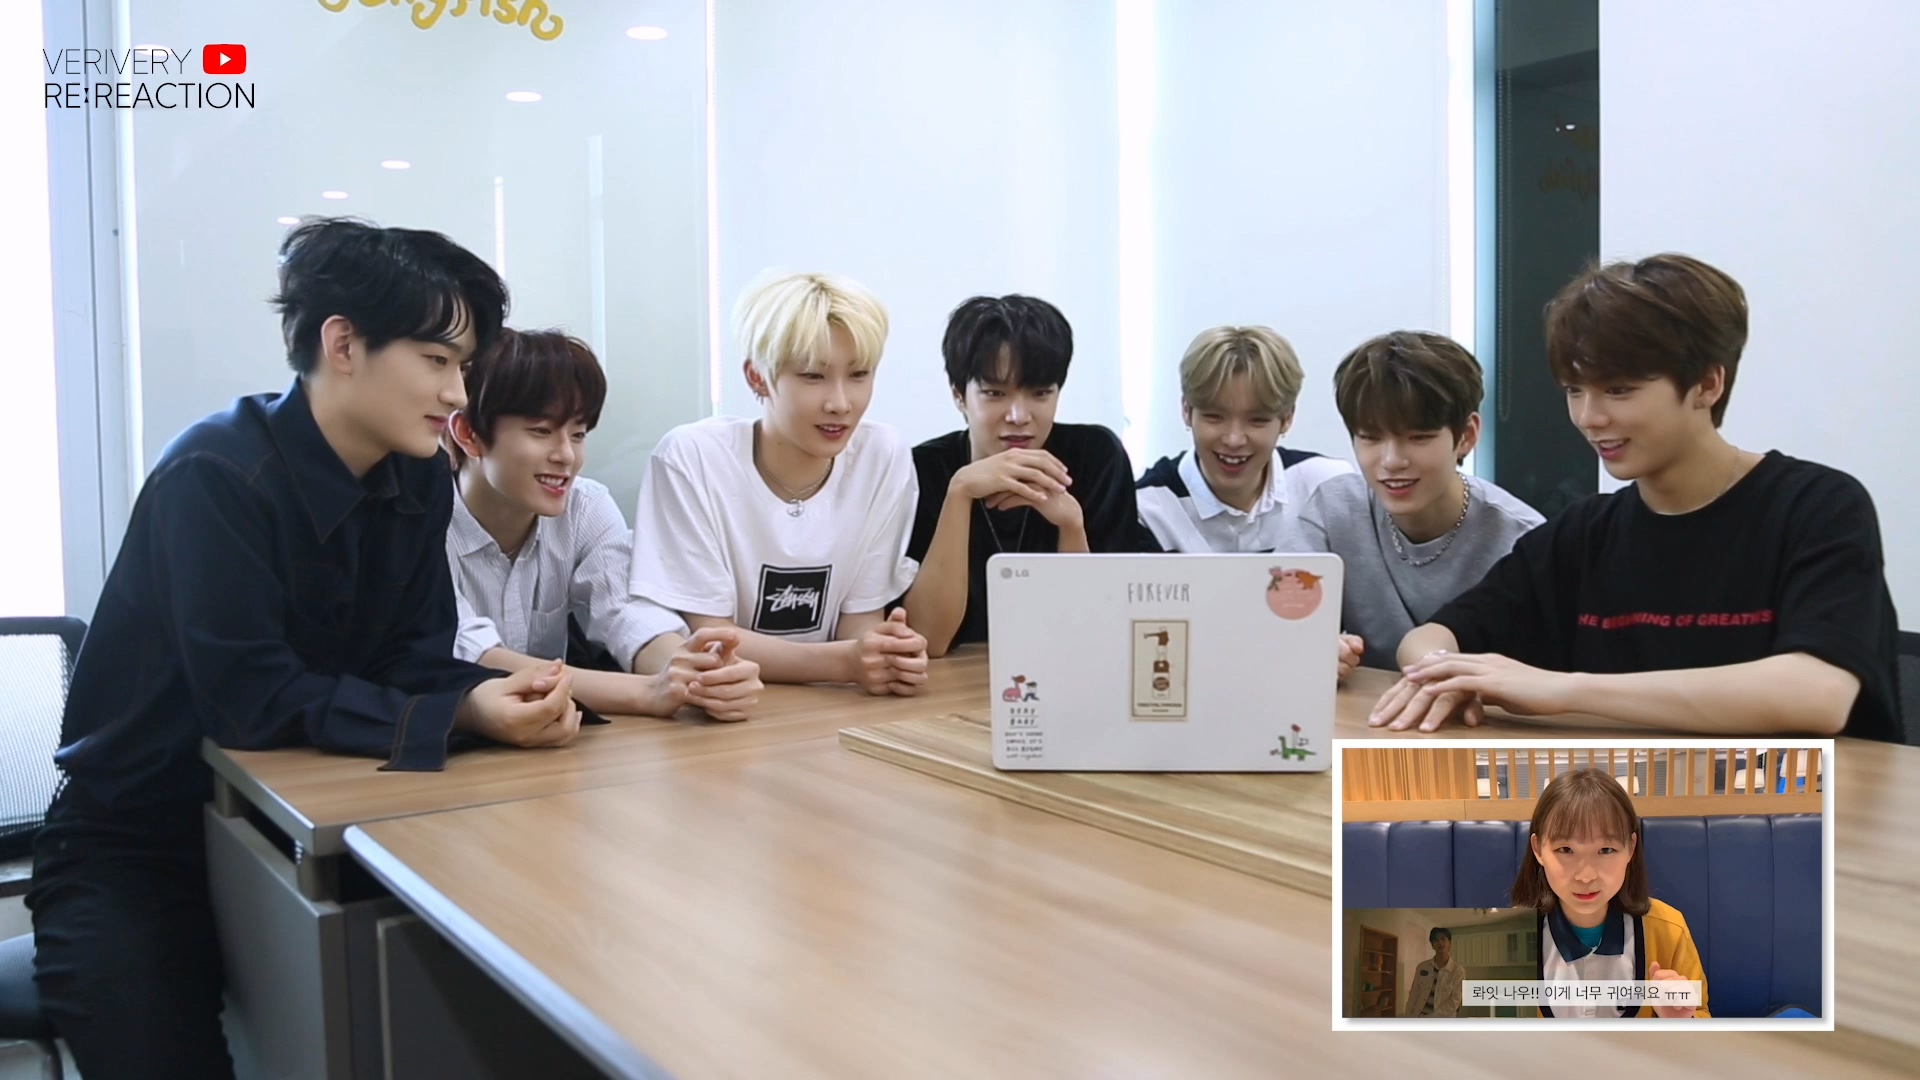 VERIVERY - 'Tag Tag Tag' Re-Reaction Video